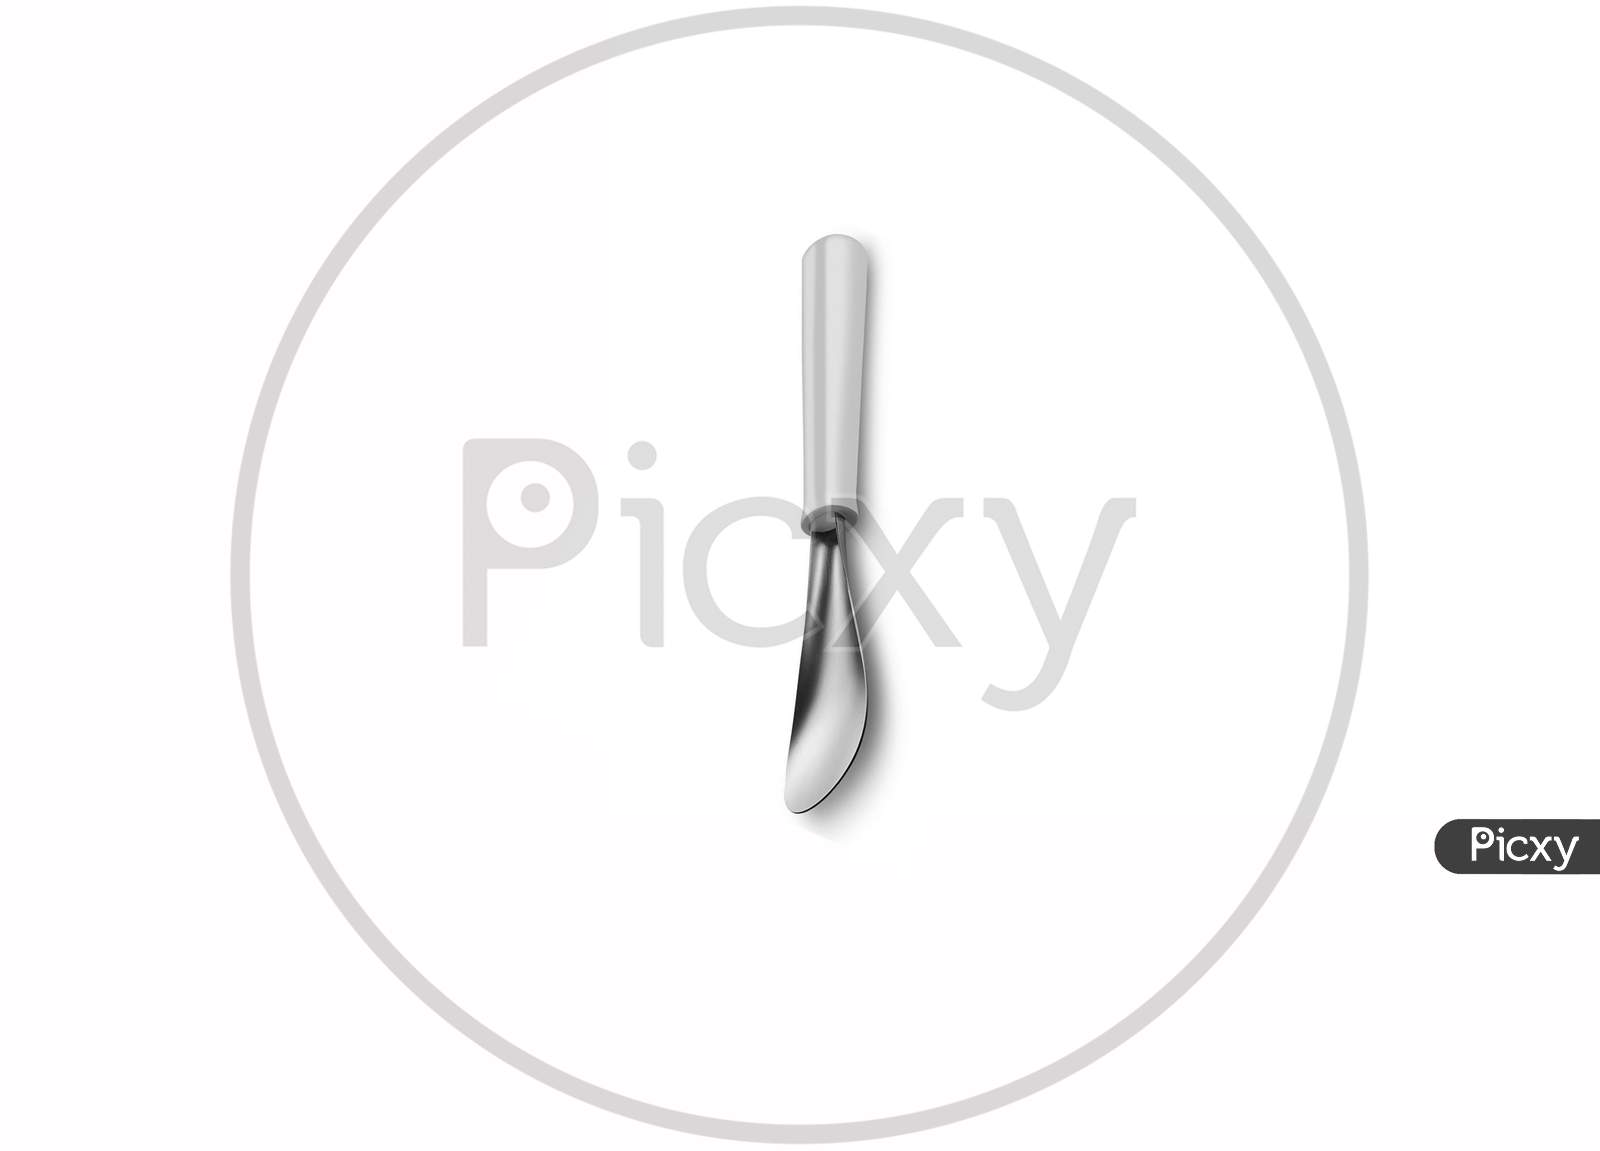 Vertically Kept One Silver Metal Cooking Spatula Isolated On A White Background